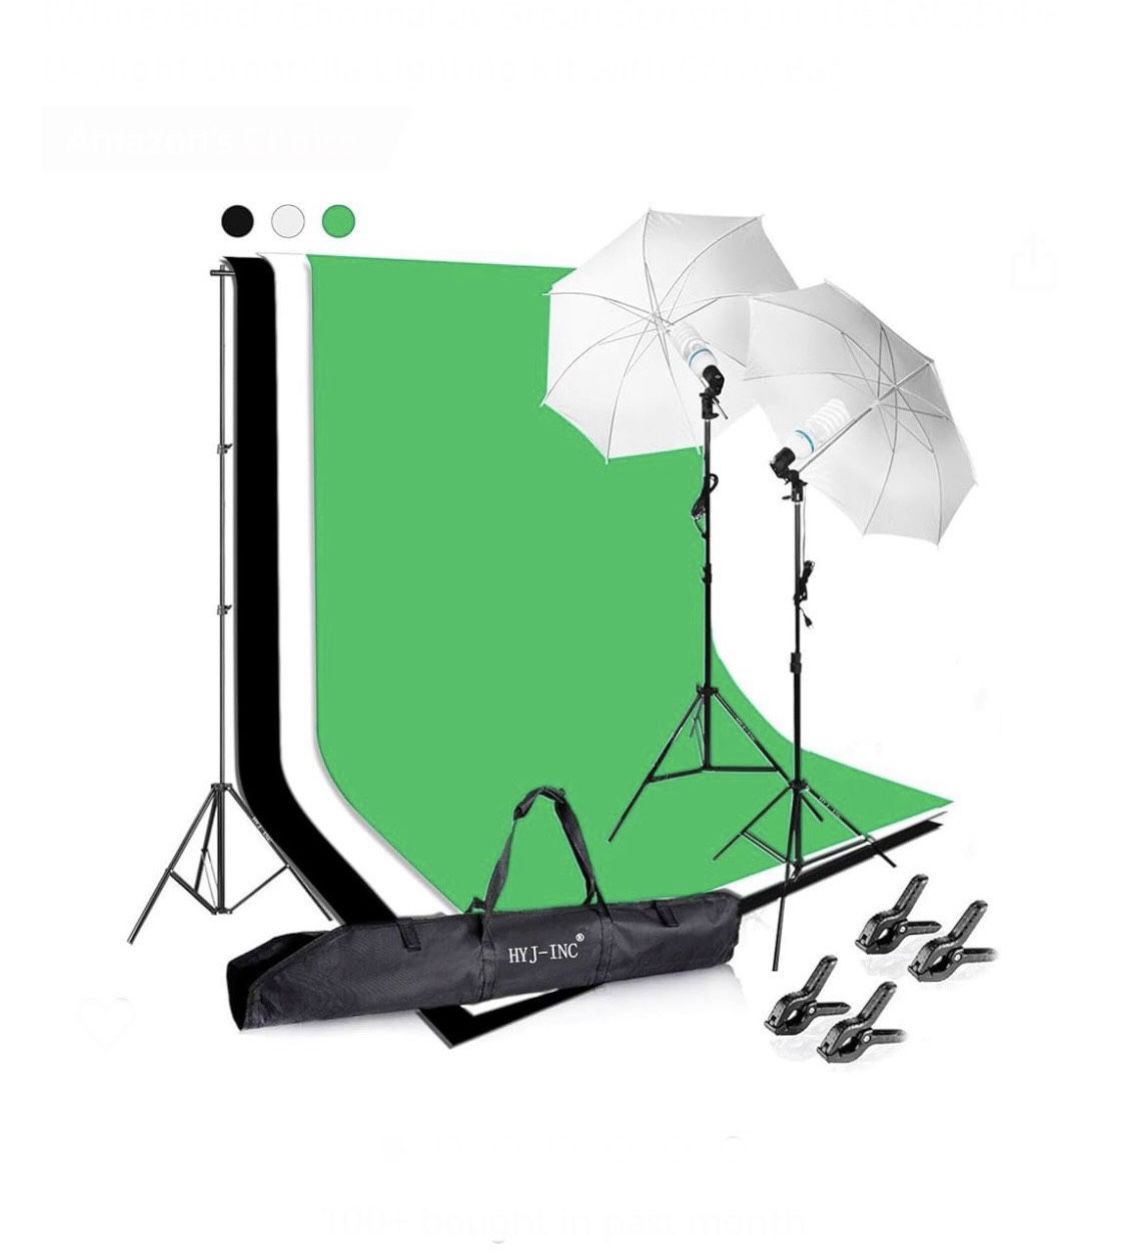 HYJ-INC Photography Photo Video Studio Background   Stand Support Kit with 3 Muslin Backdrop  Kits (White/Black/Chromakey Green  Screen Kit), 1050W 55